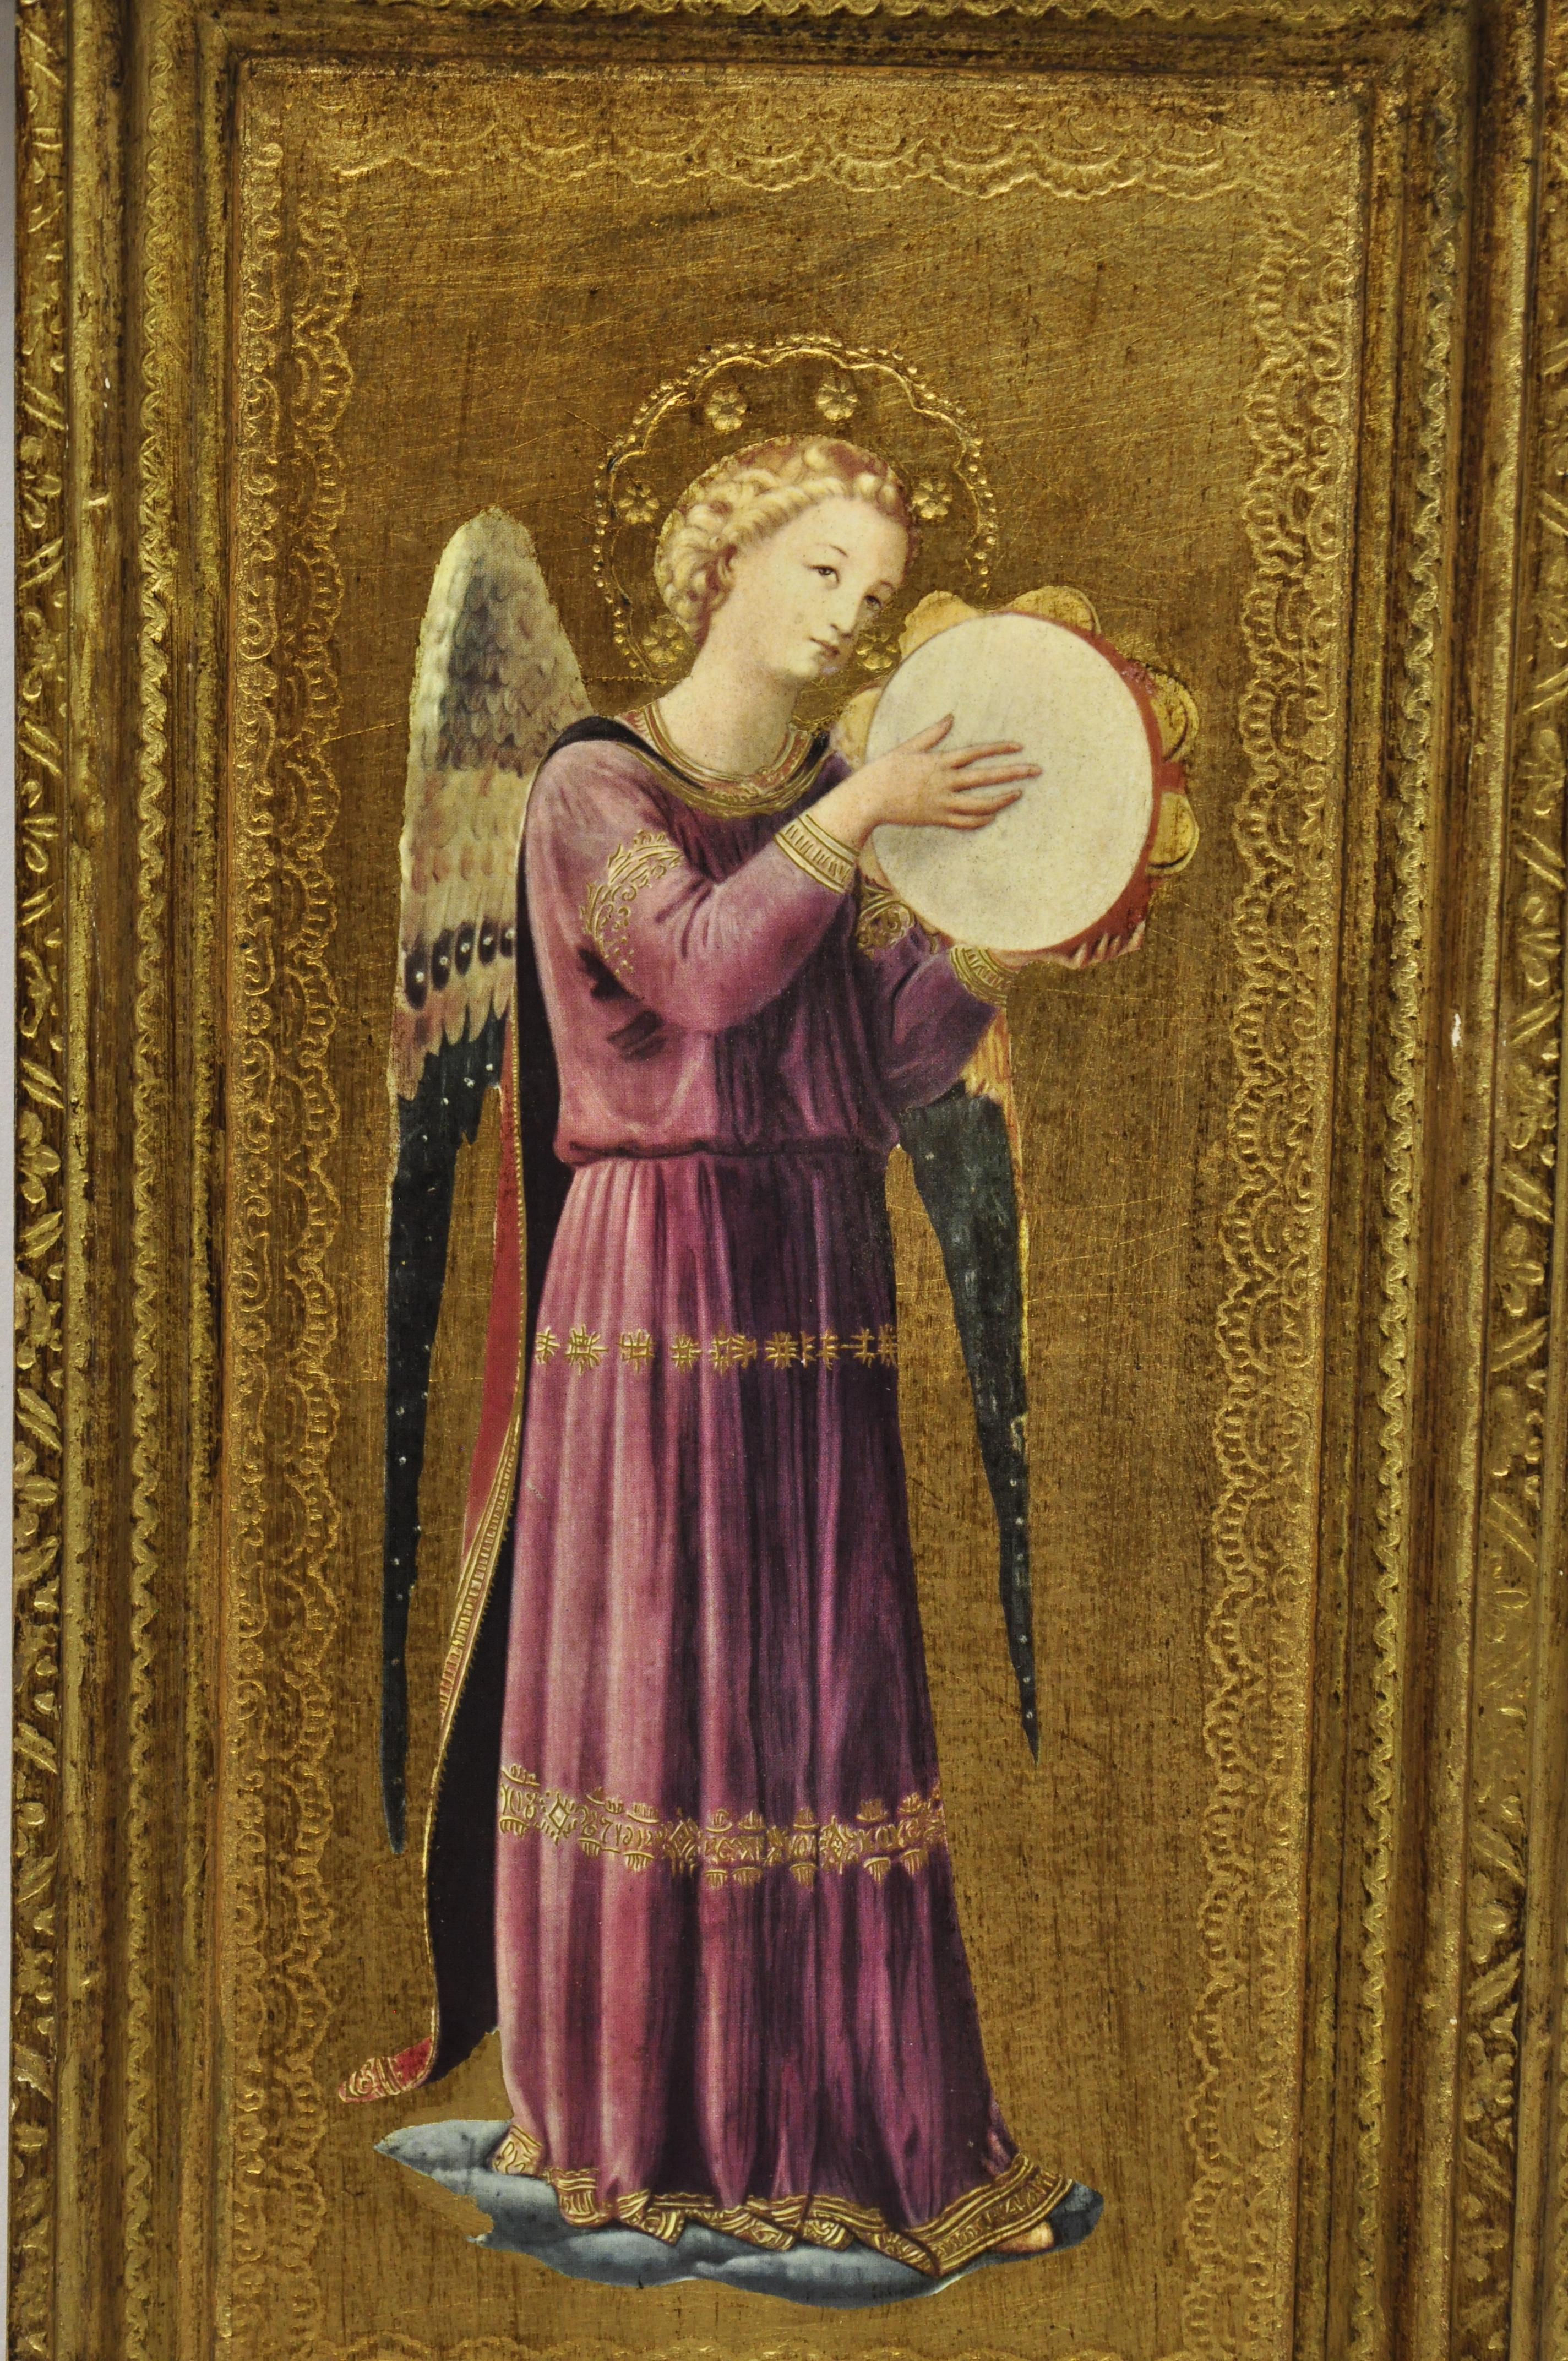 Vintage Italian Florentine gold giltwood 16 x 26 musical Angels mirror by Exposures. Item features gold leaf finish, 2 musical angels, solid wood frame, original label, very nice vintage item, great style and form, circa 1997. Measurements: 16.25